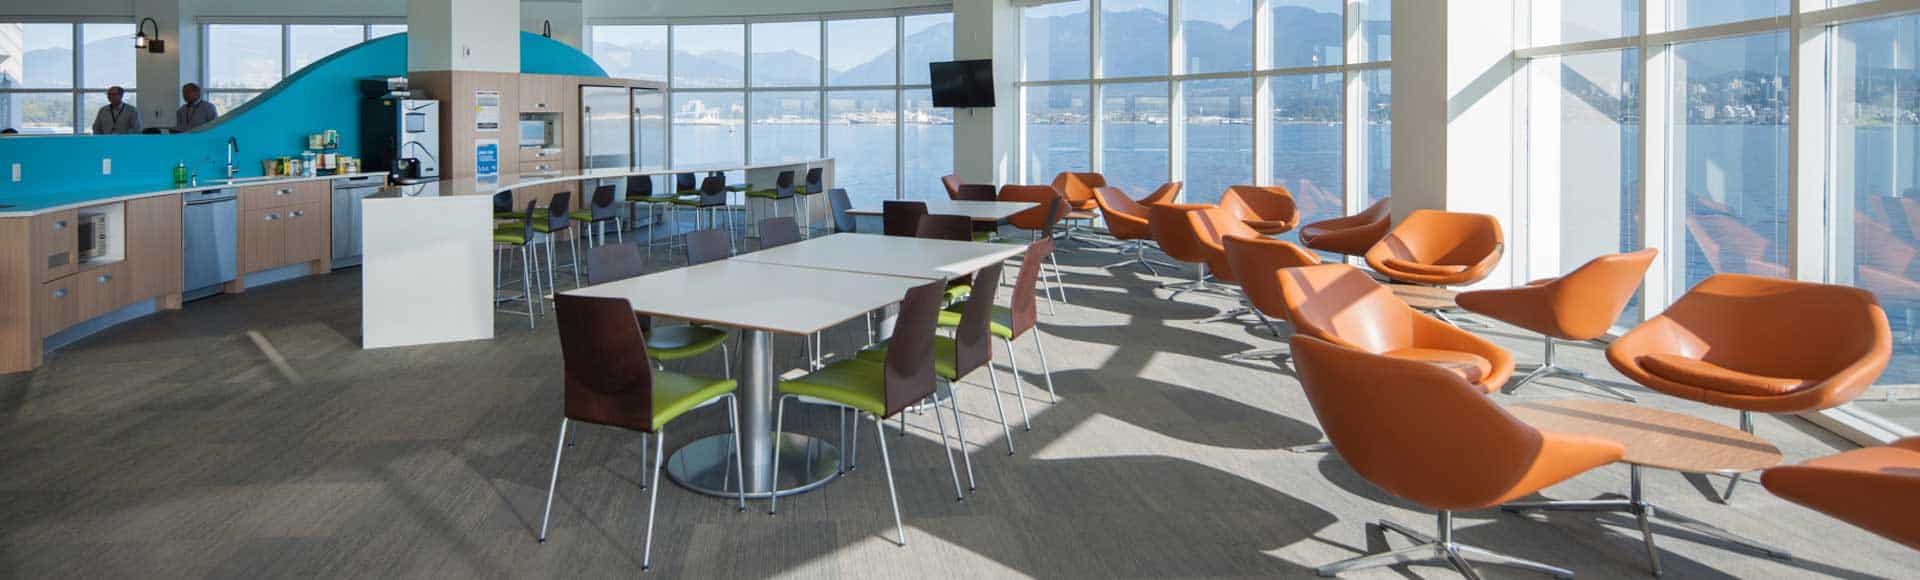 Design and Furniture for Hospitality Spaces